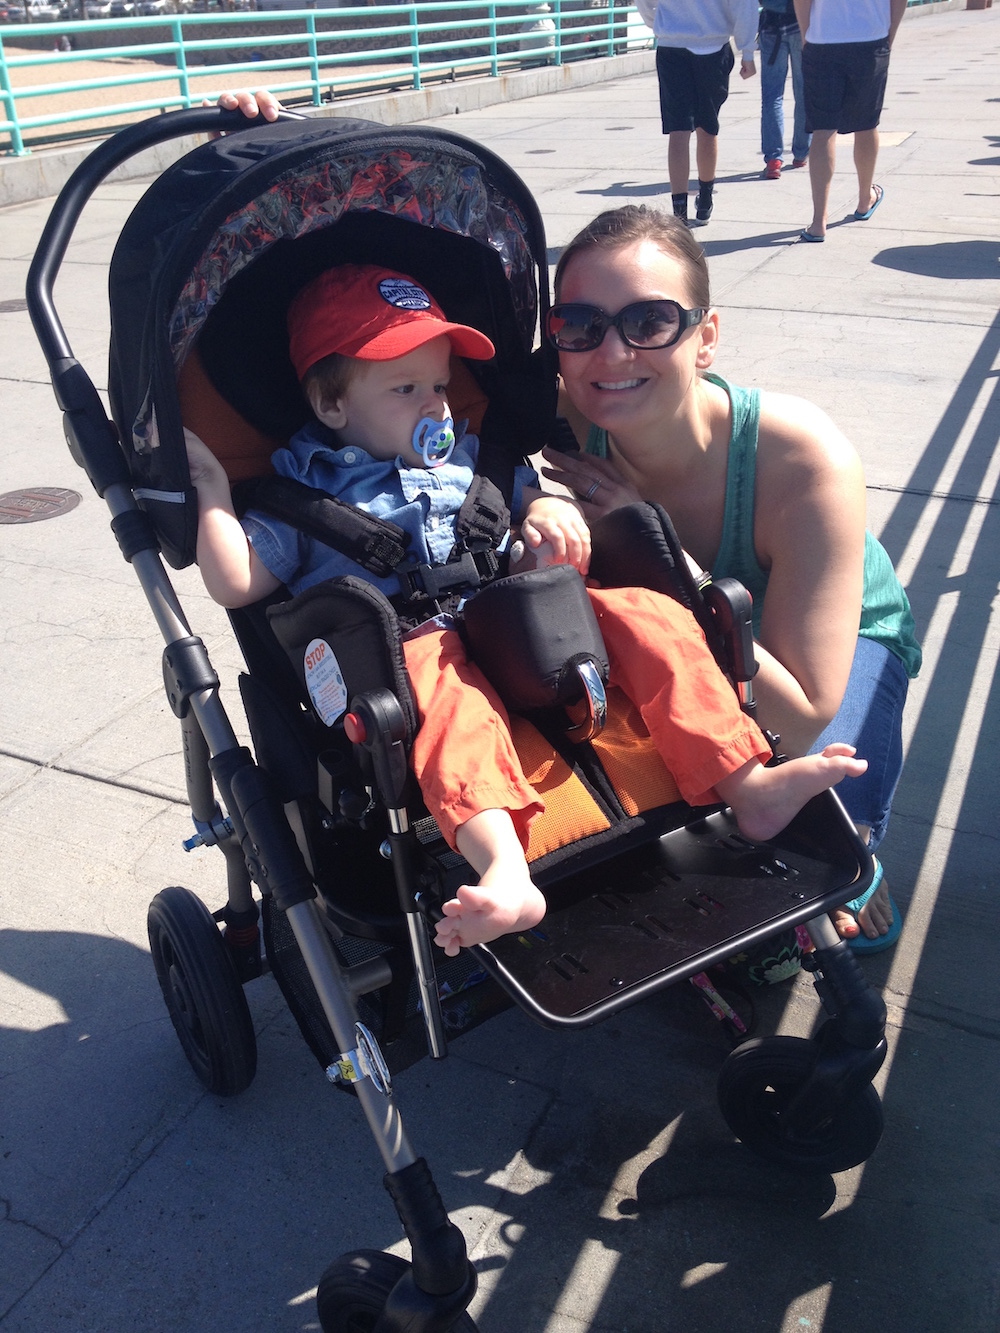 mom smiling next to son in stroller